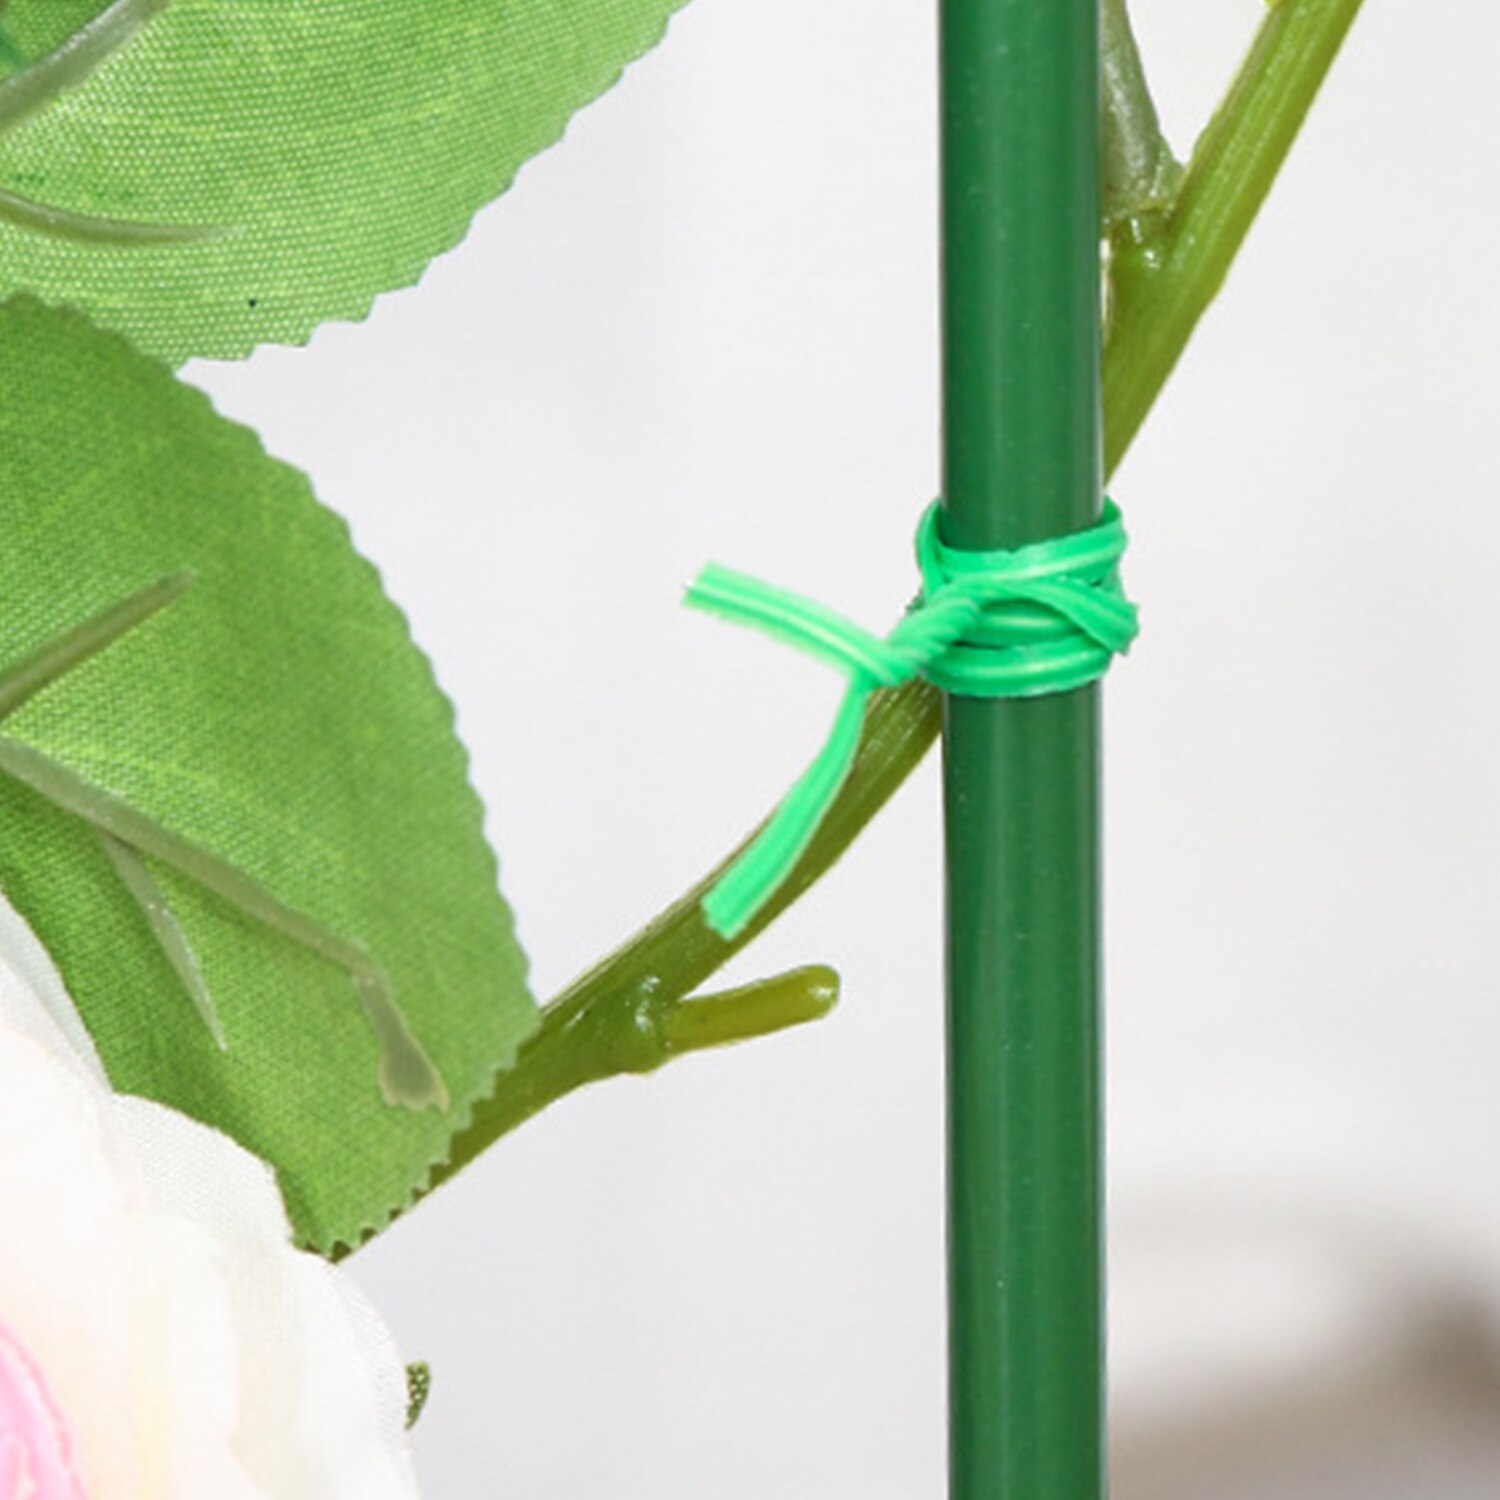 100m Garden Twine Plant Ties Twist Ties with Cutter for Gardening Plants Secure Vines Wrapping Cords Office Organization